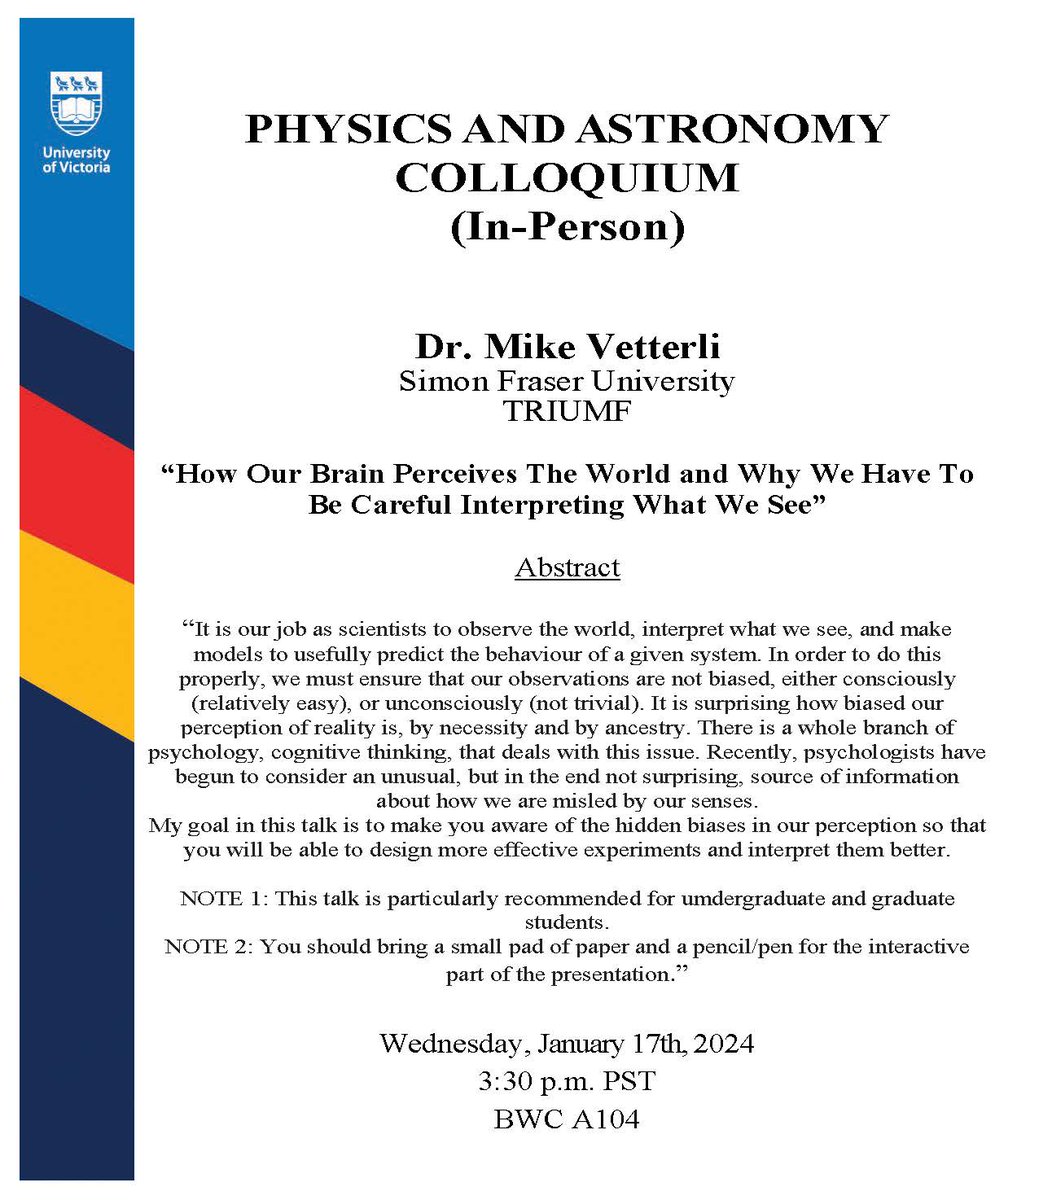 COLLOQUIUM (In-Person): Dr. Mike Vetterli, SFU-TRIUMF will be giving an in-person colloquium Wednesday January 17th at 3:30pm PST in BWC A104. For more information: events.uvic.ca/physics/event/…